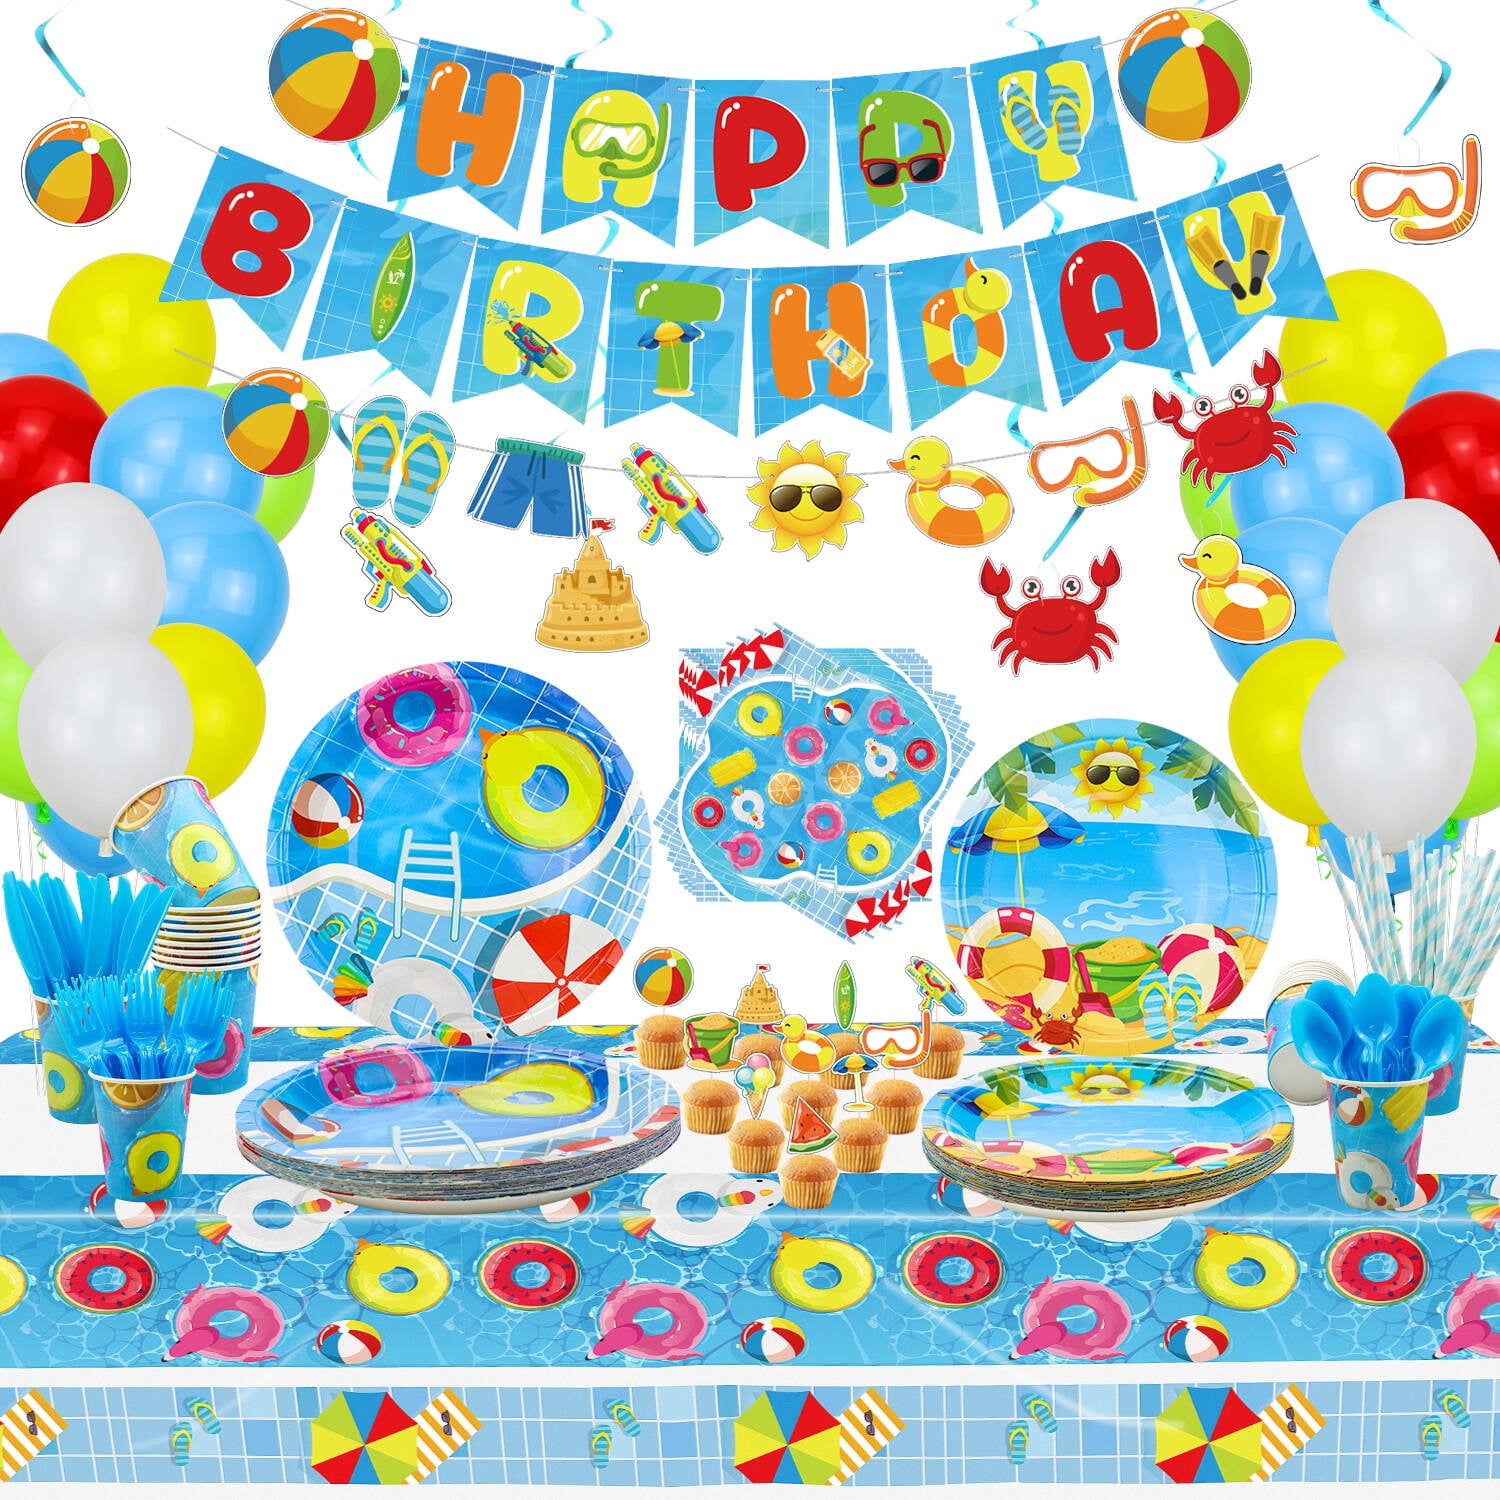 Tie Dye Party Decorations & Birthday Supplies (16 Guests) - Set Includes  Banner, Balloons, Jumbo Tablecloth, Plates & Disposable Tableware Bundle